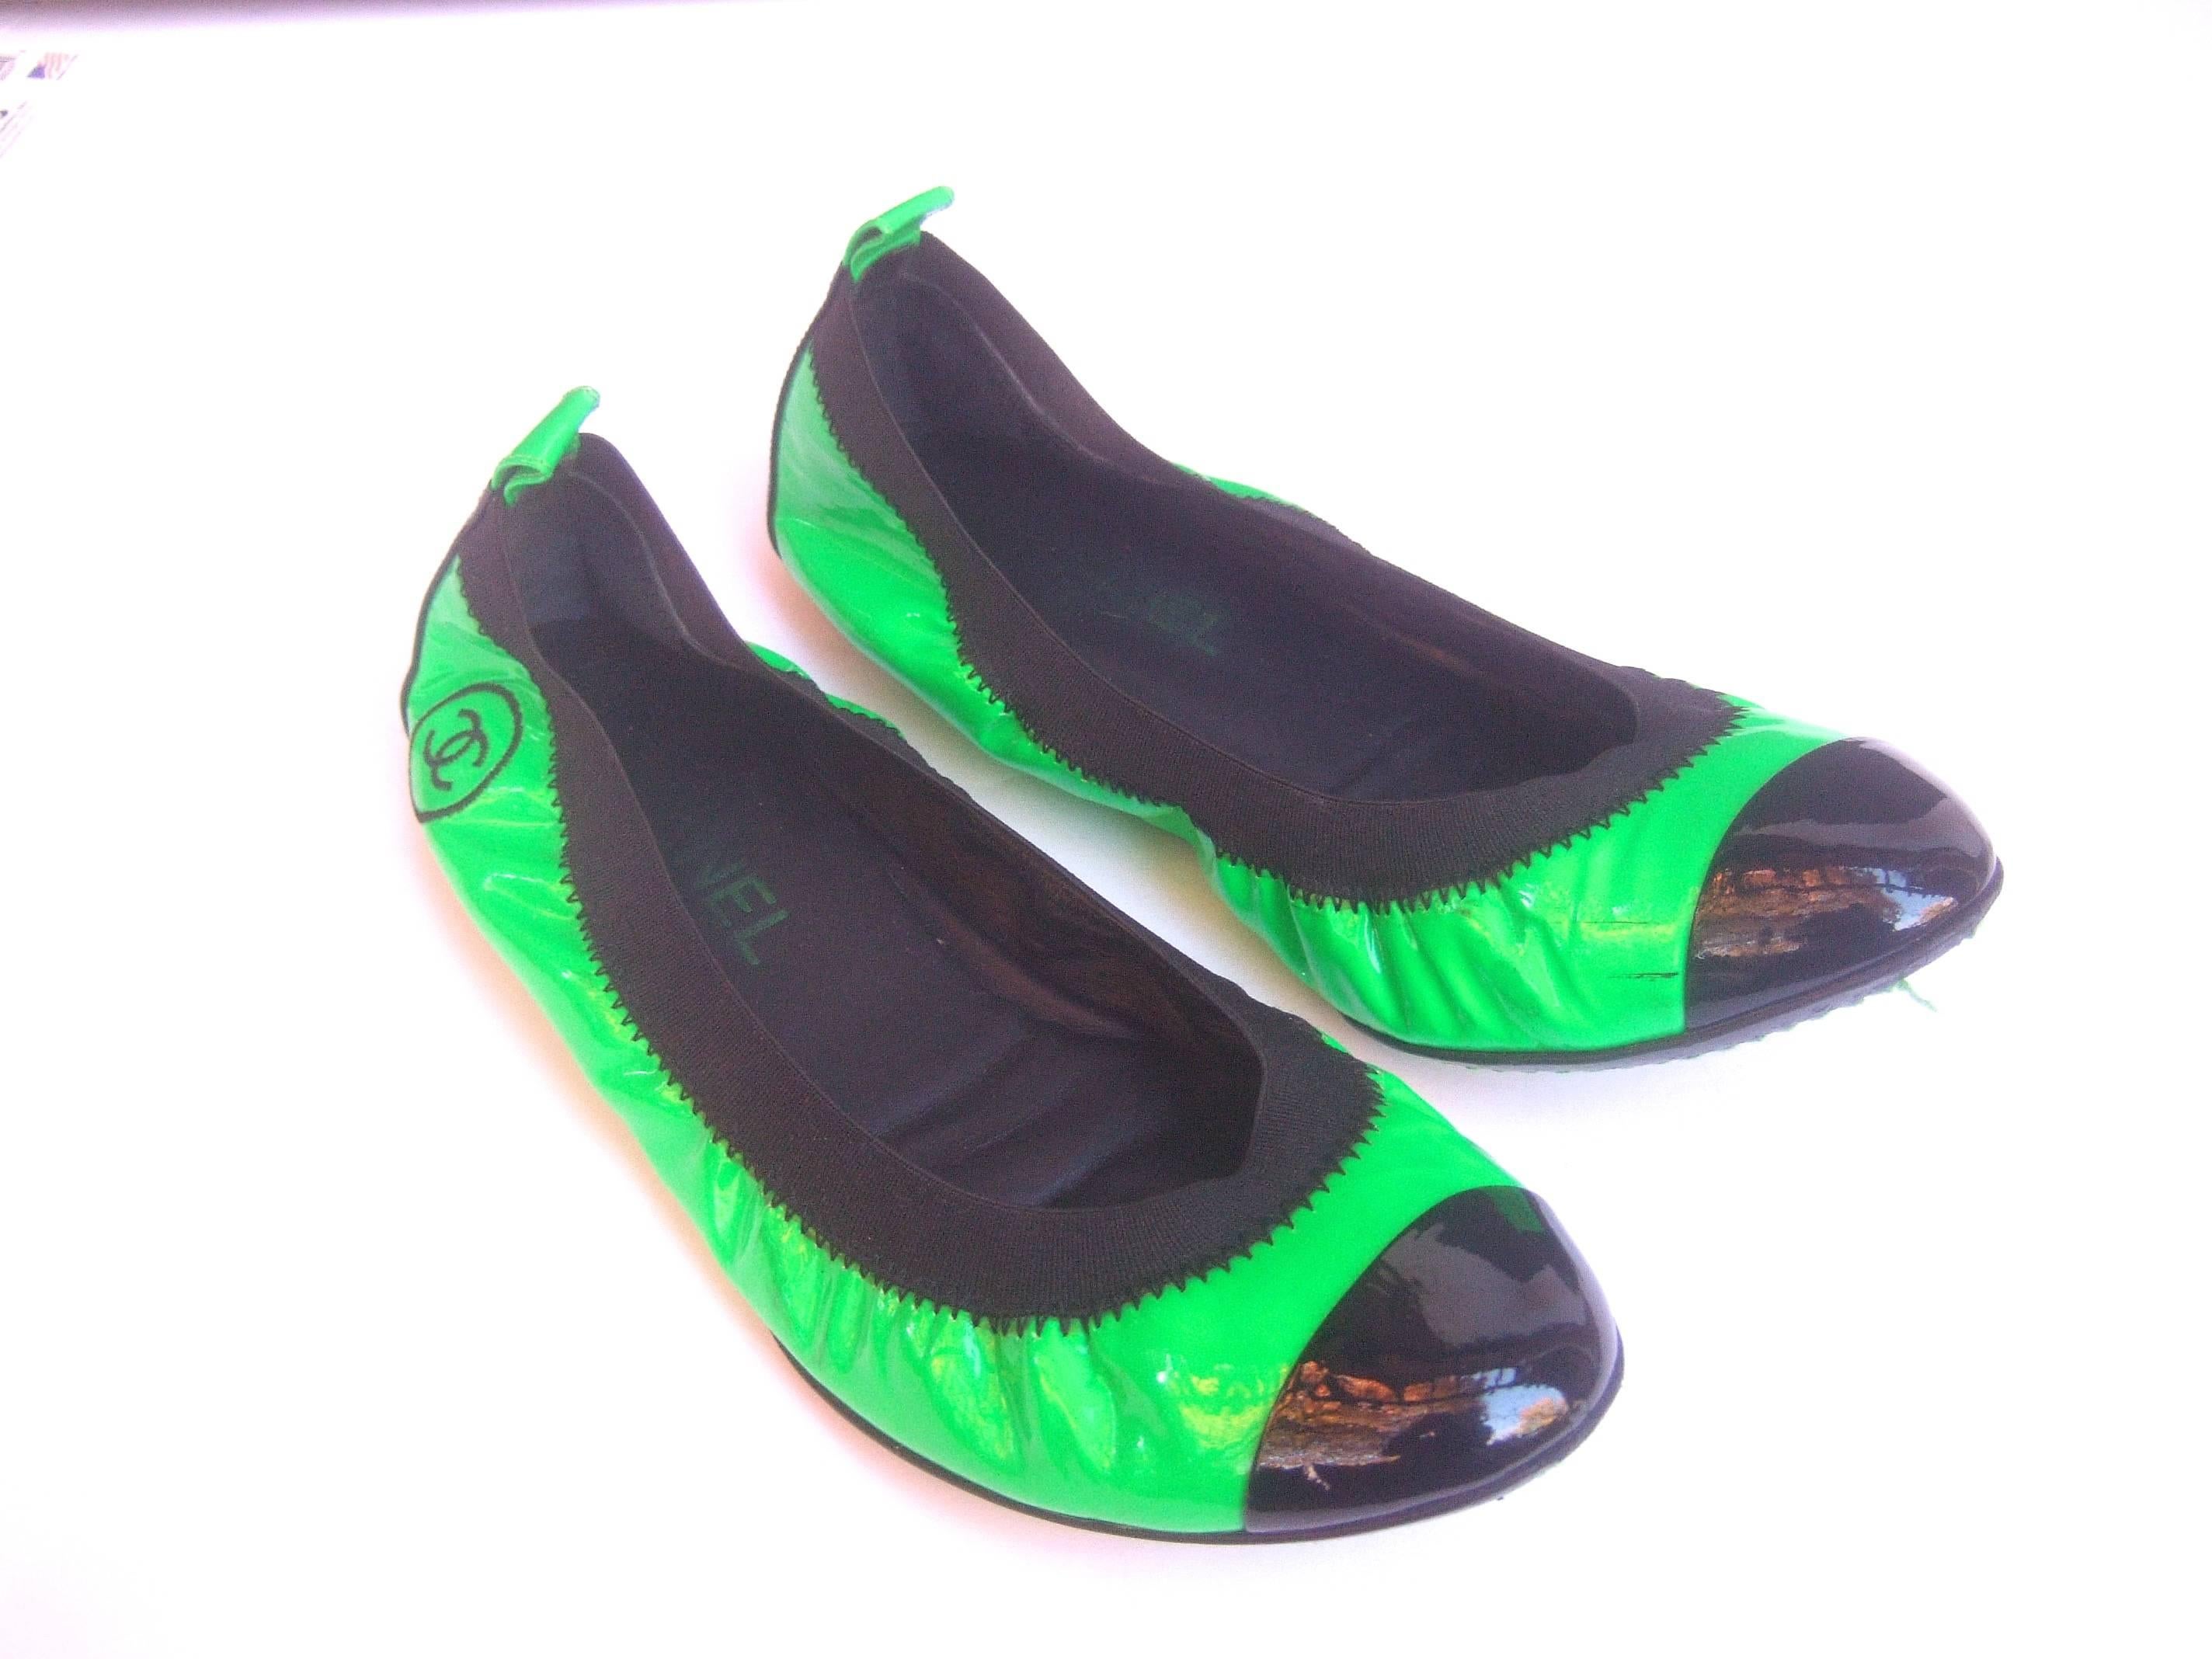 Chanel Italian patent leather skimmer flats Size 37
The stylish Chanel flats are designed with bright
green patent leather 

The toes and back exterior heels are accented 
with shiny black patent leather. The sides of each
shoe are adorned with